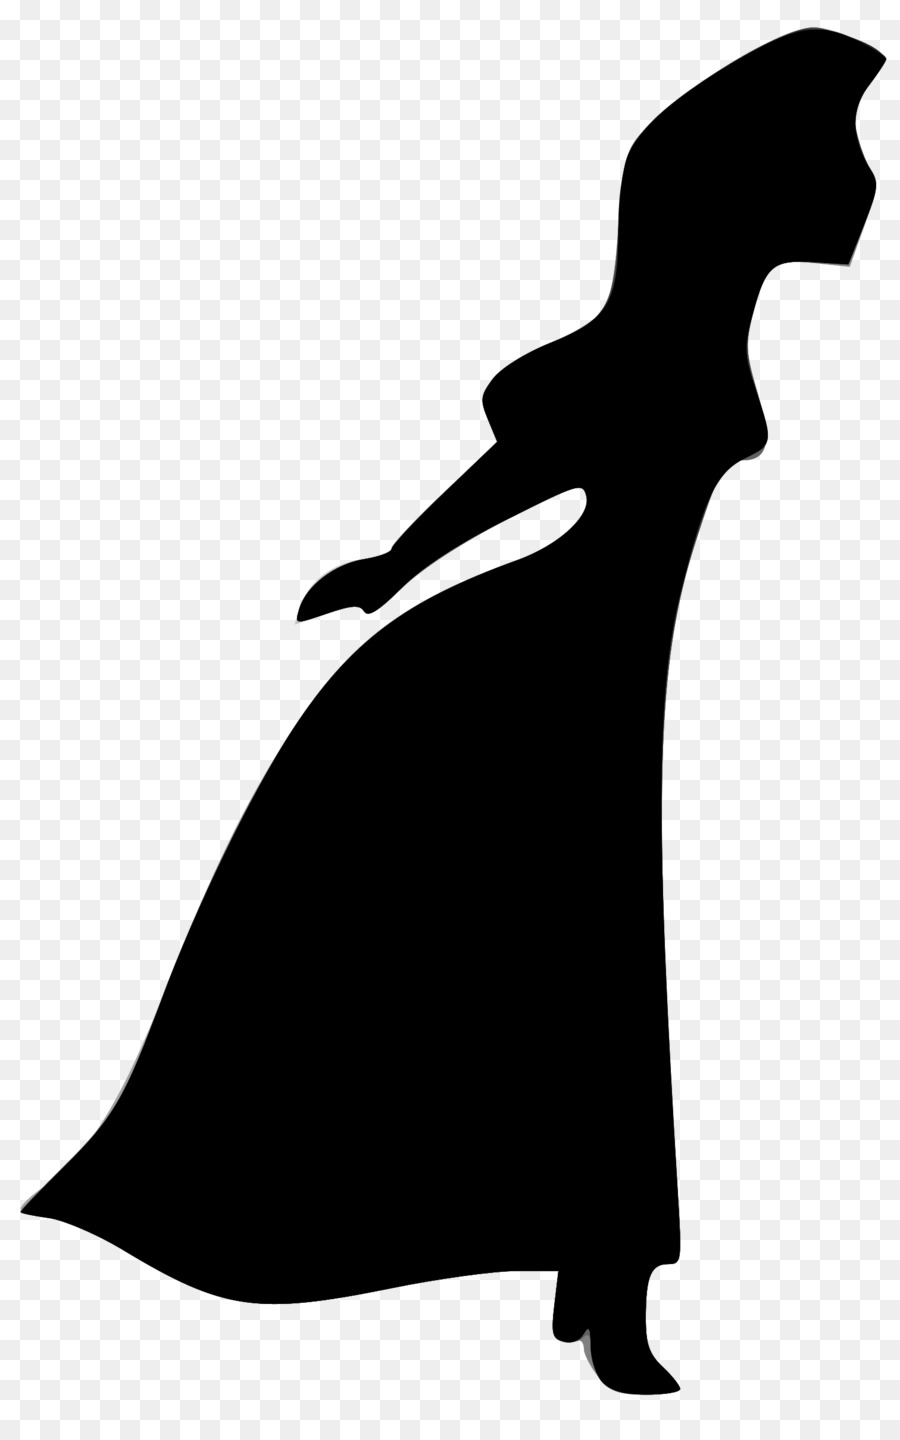 Silhouette Black cat Drawing Bombay cat Clip art - Silhouette png download - 1512*2400 - Free Transparent Silhouette png Download.